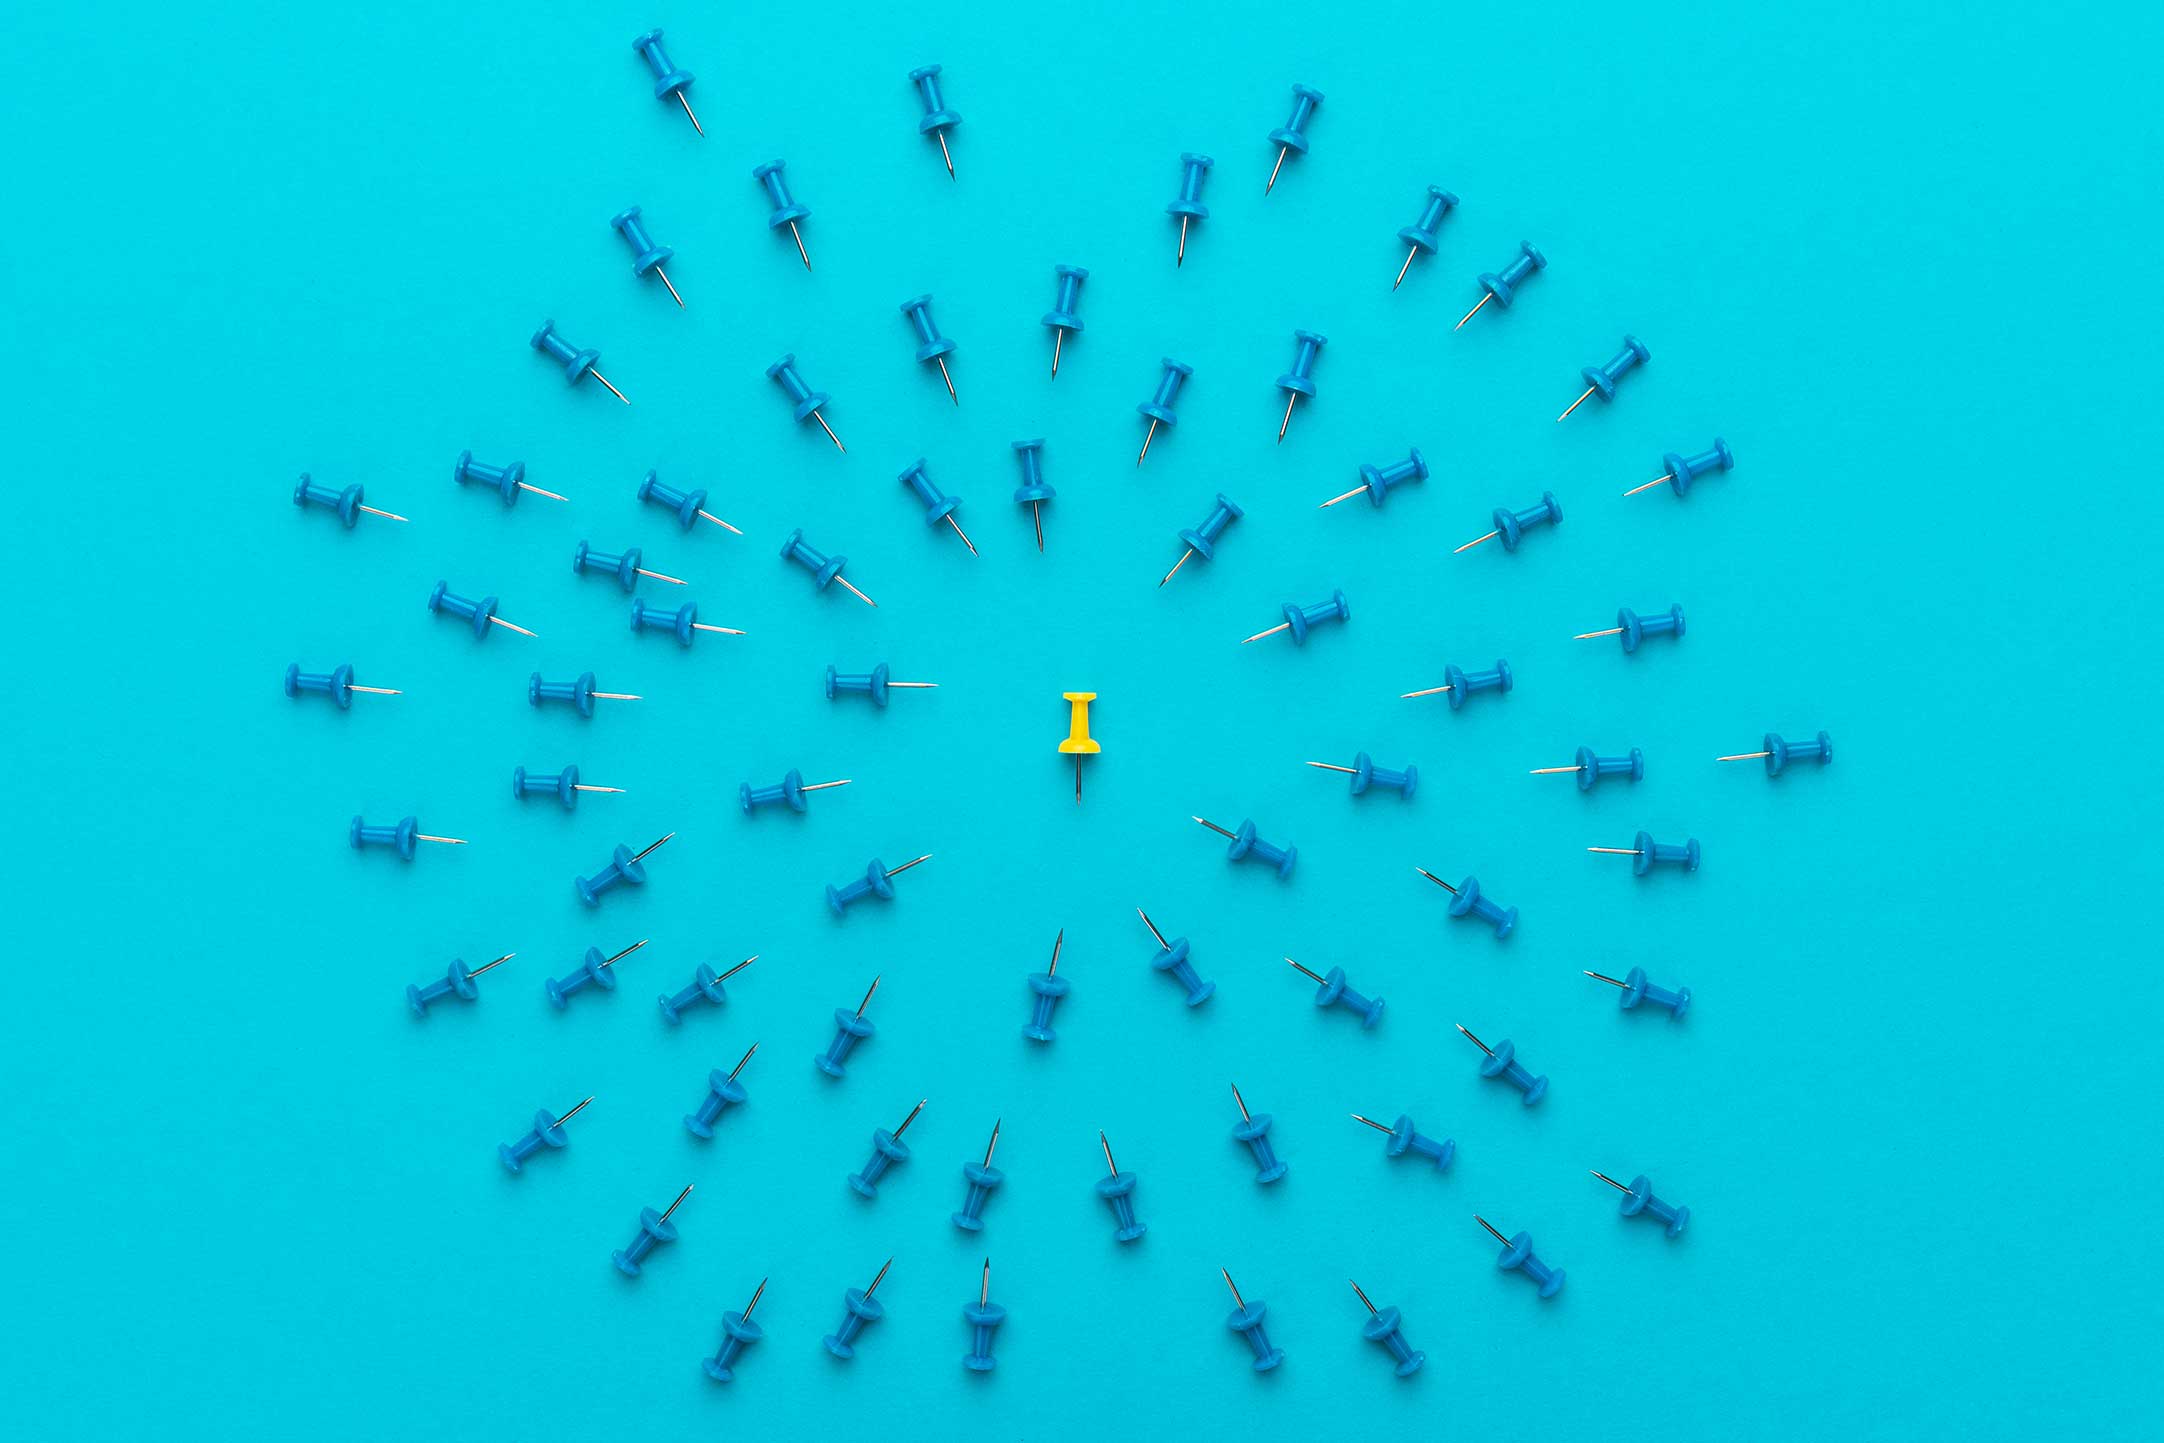 yellow push pin surrounded by blue push pins on a plain blue background